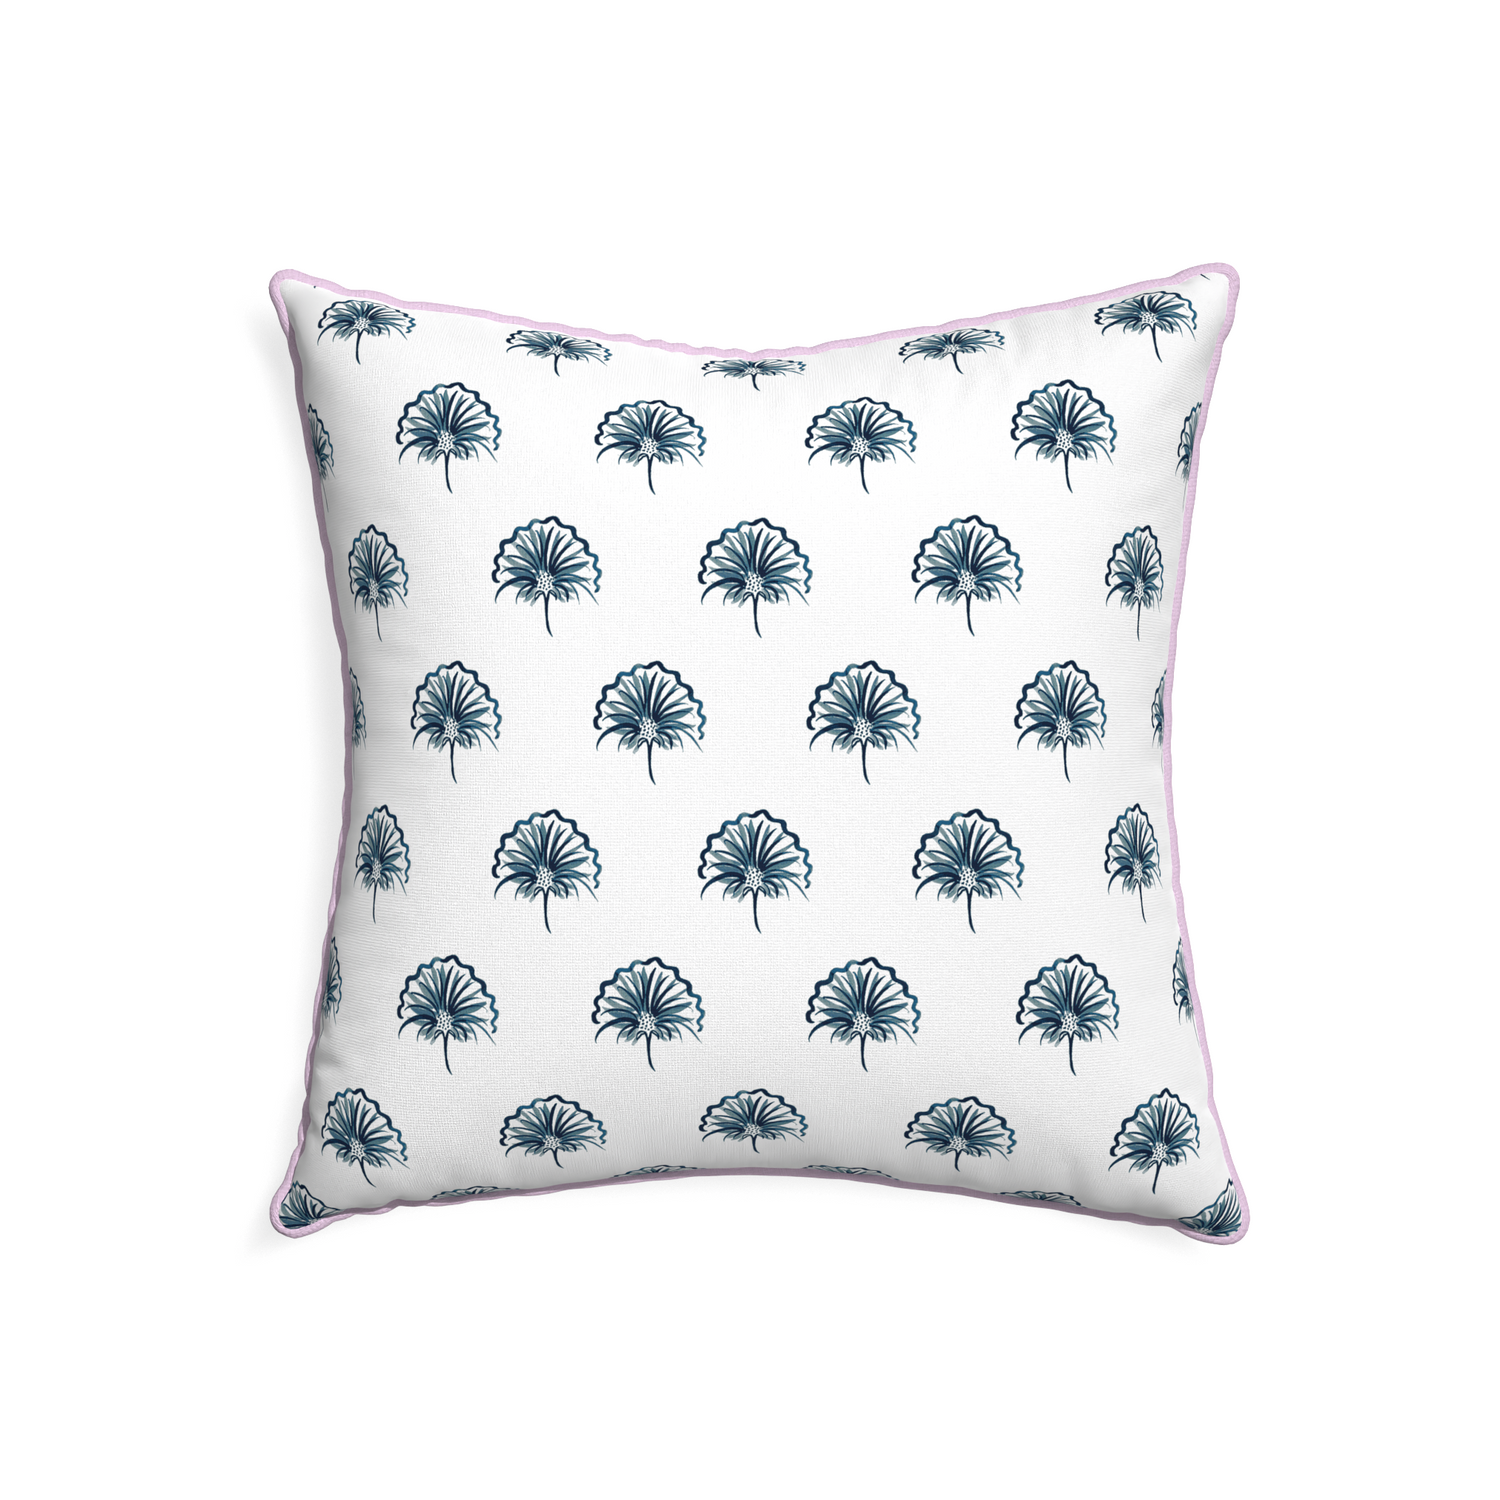 22-square penelope midnight custom pillow with l piping on white background